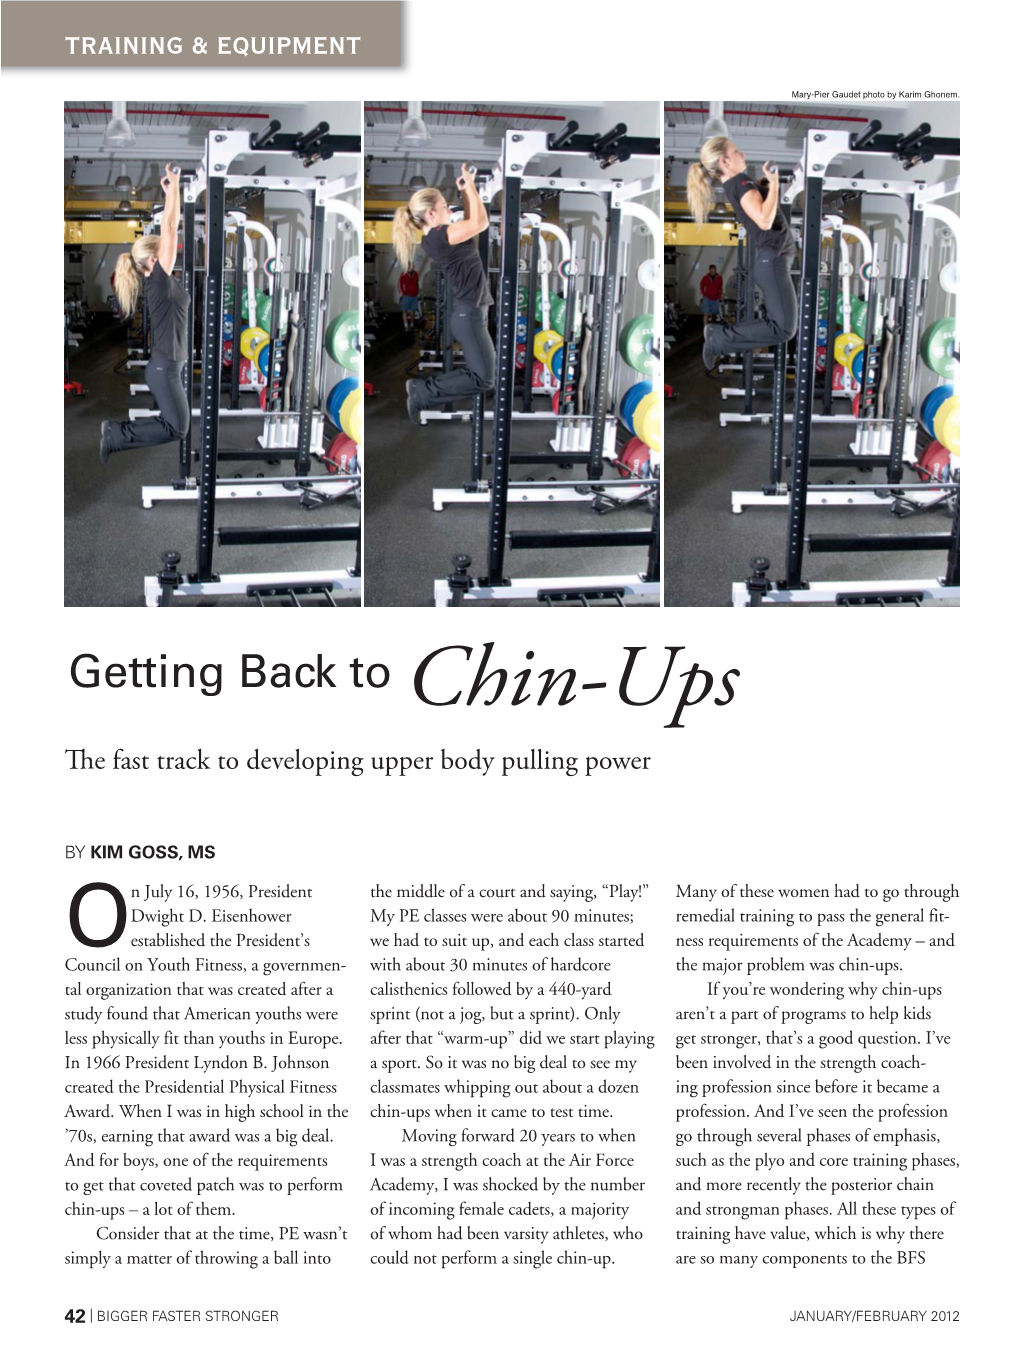 Getting Back to Chin-Ups